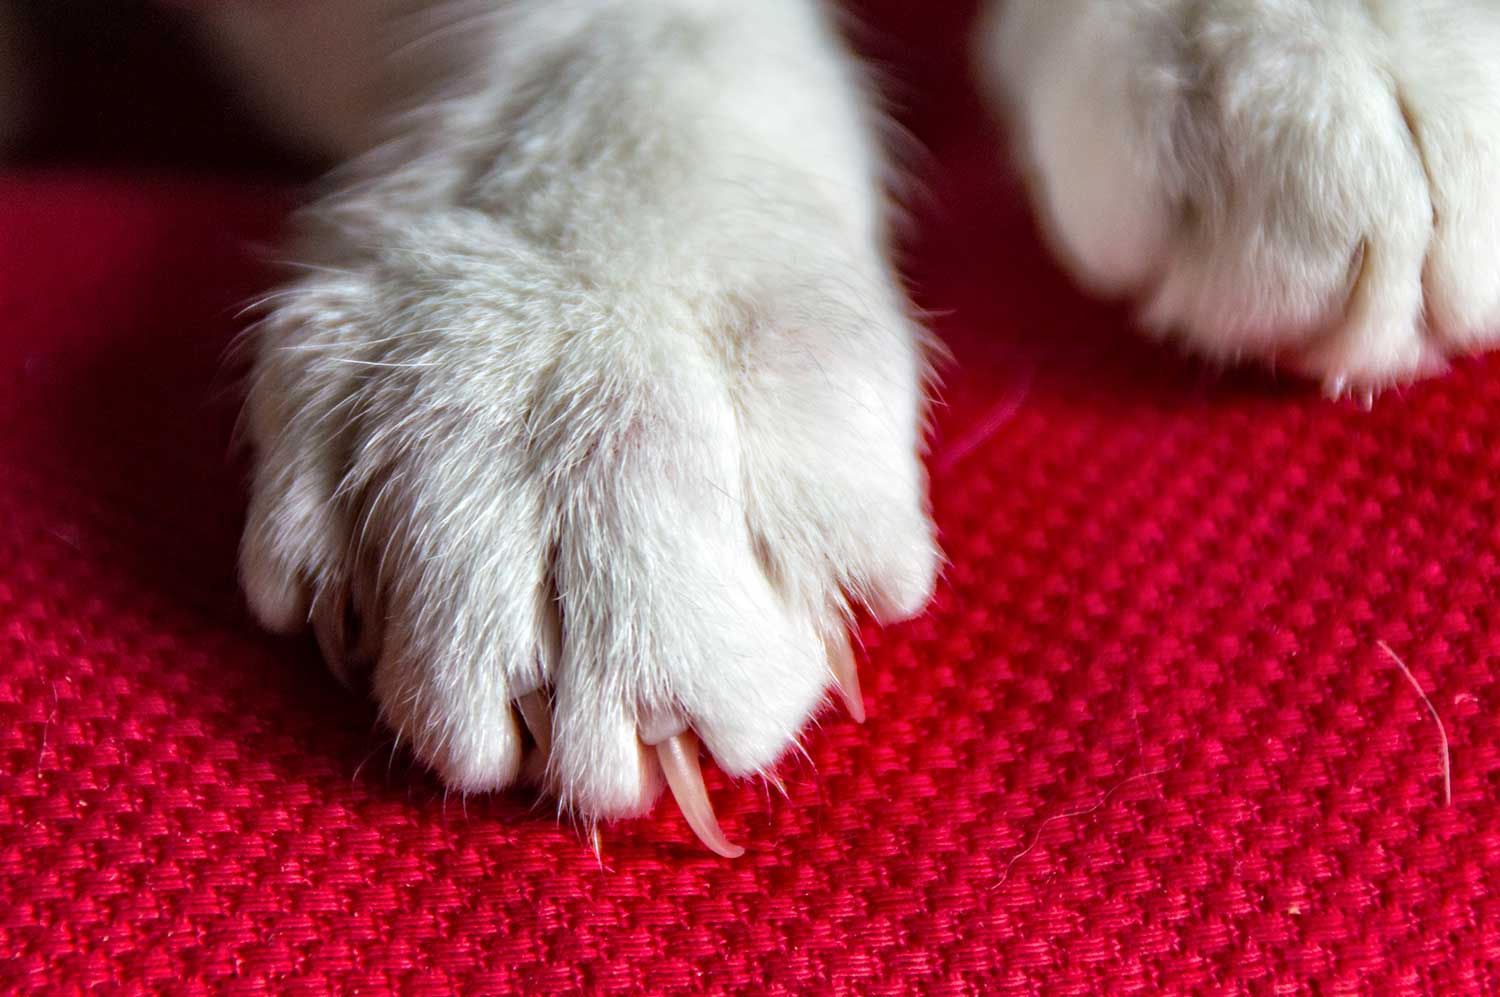 White cat's paw with claw